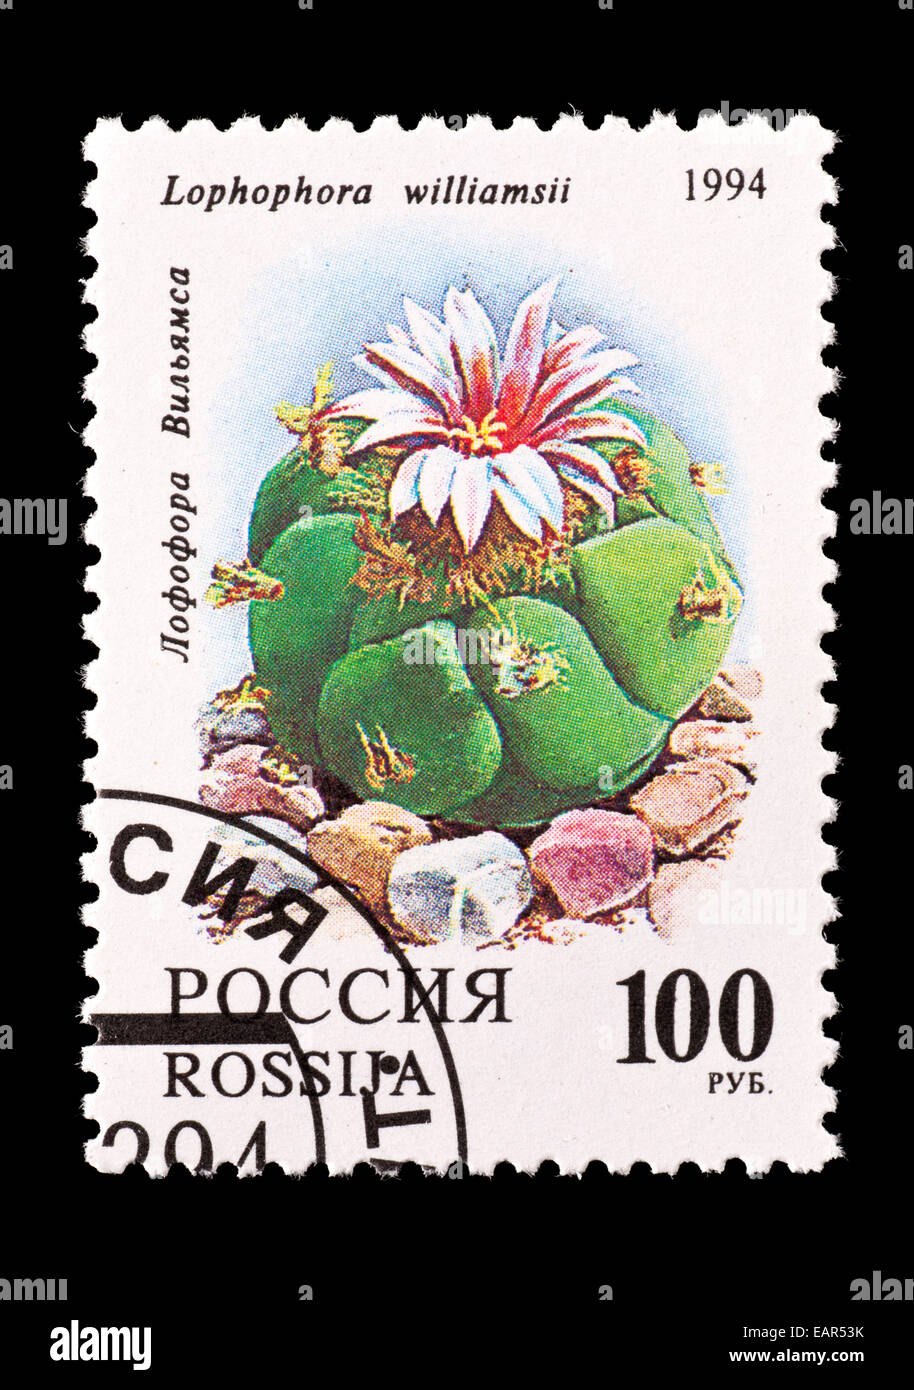 Postage stamp from Russia depicting a peyote cactus (Lophophora williamsii) Stock Photo